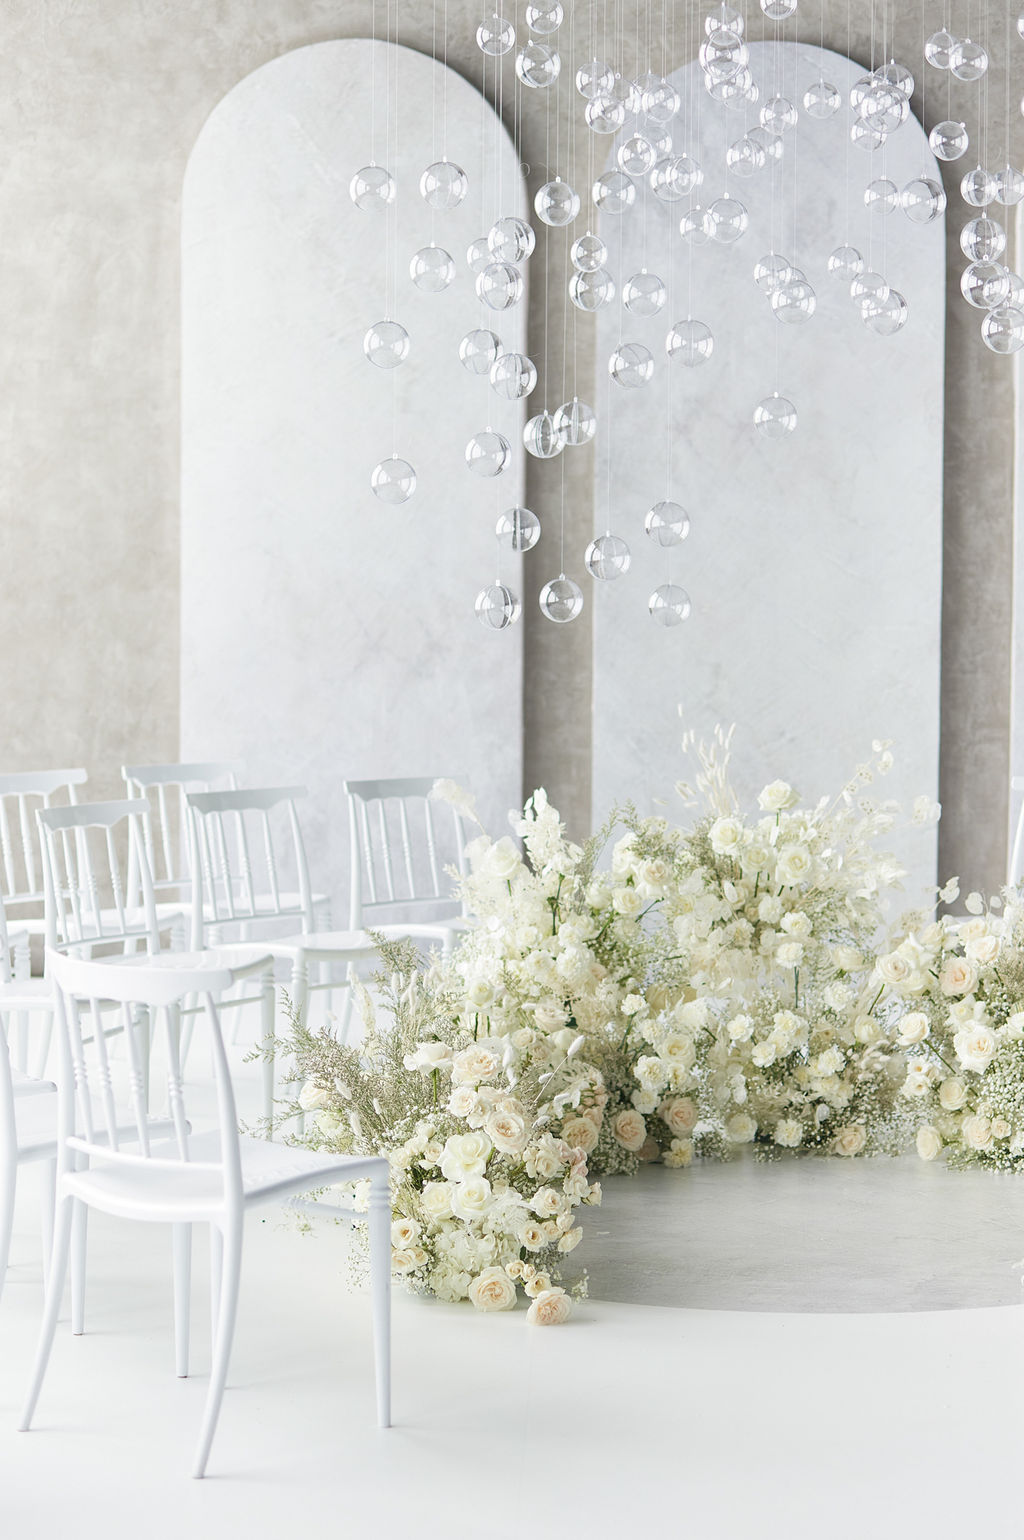 Wedding ceremony aisle decorated with flowers and white chairs